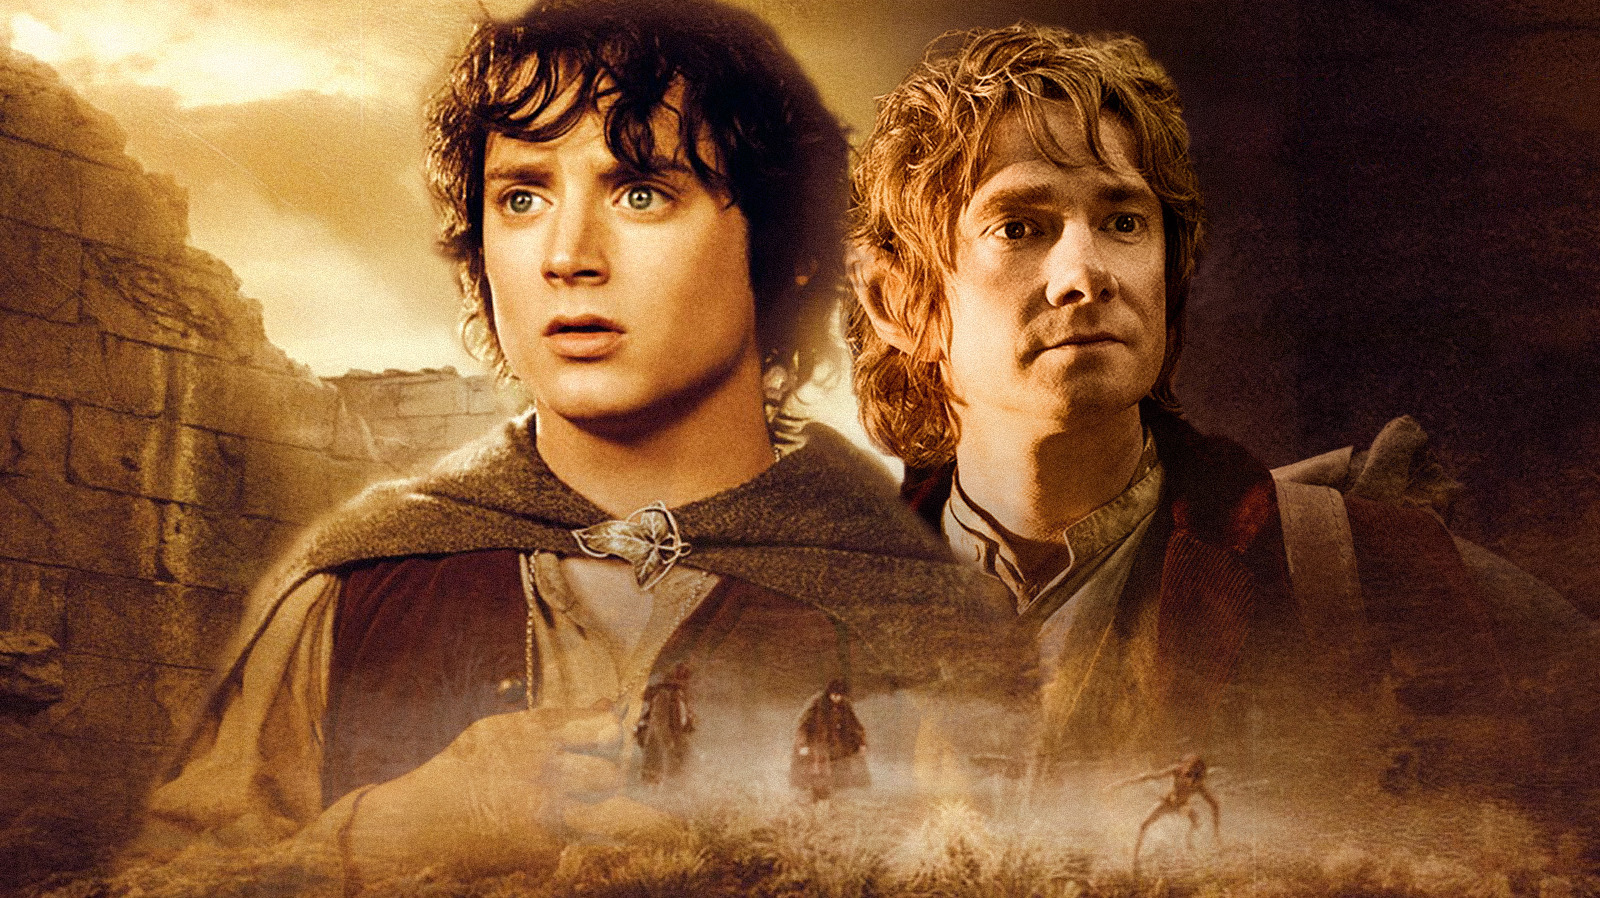 movies fantasy art The Lord of the Rings: The Fellowship of the